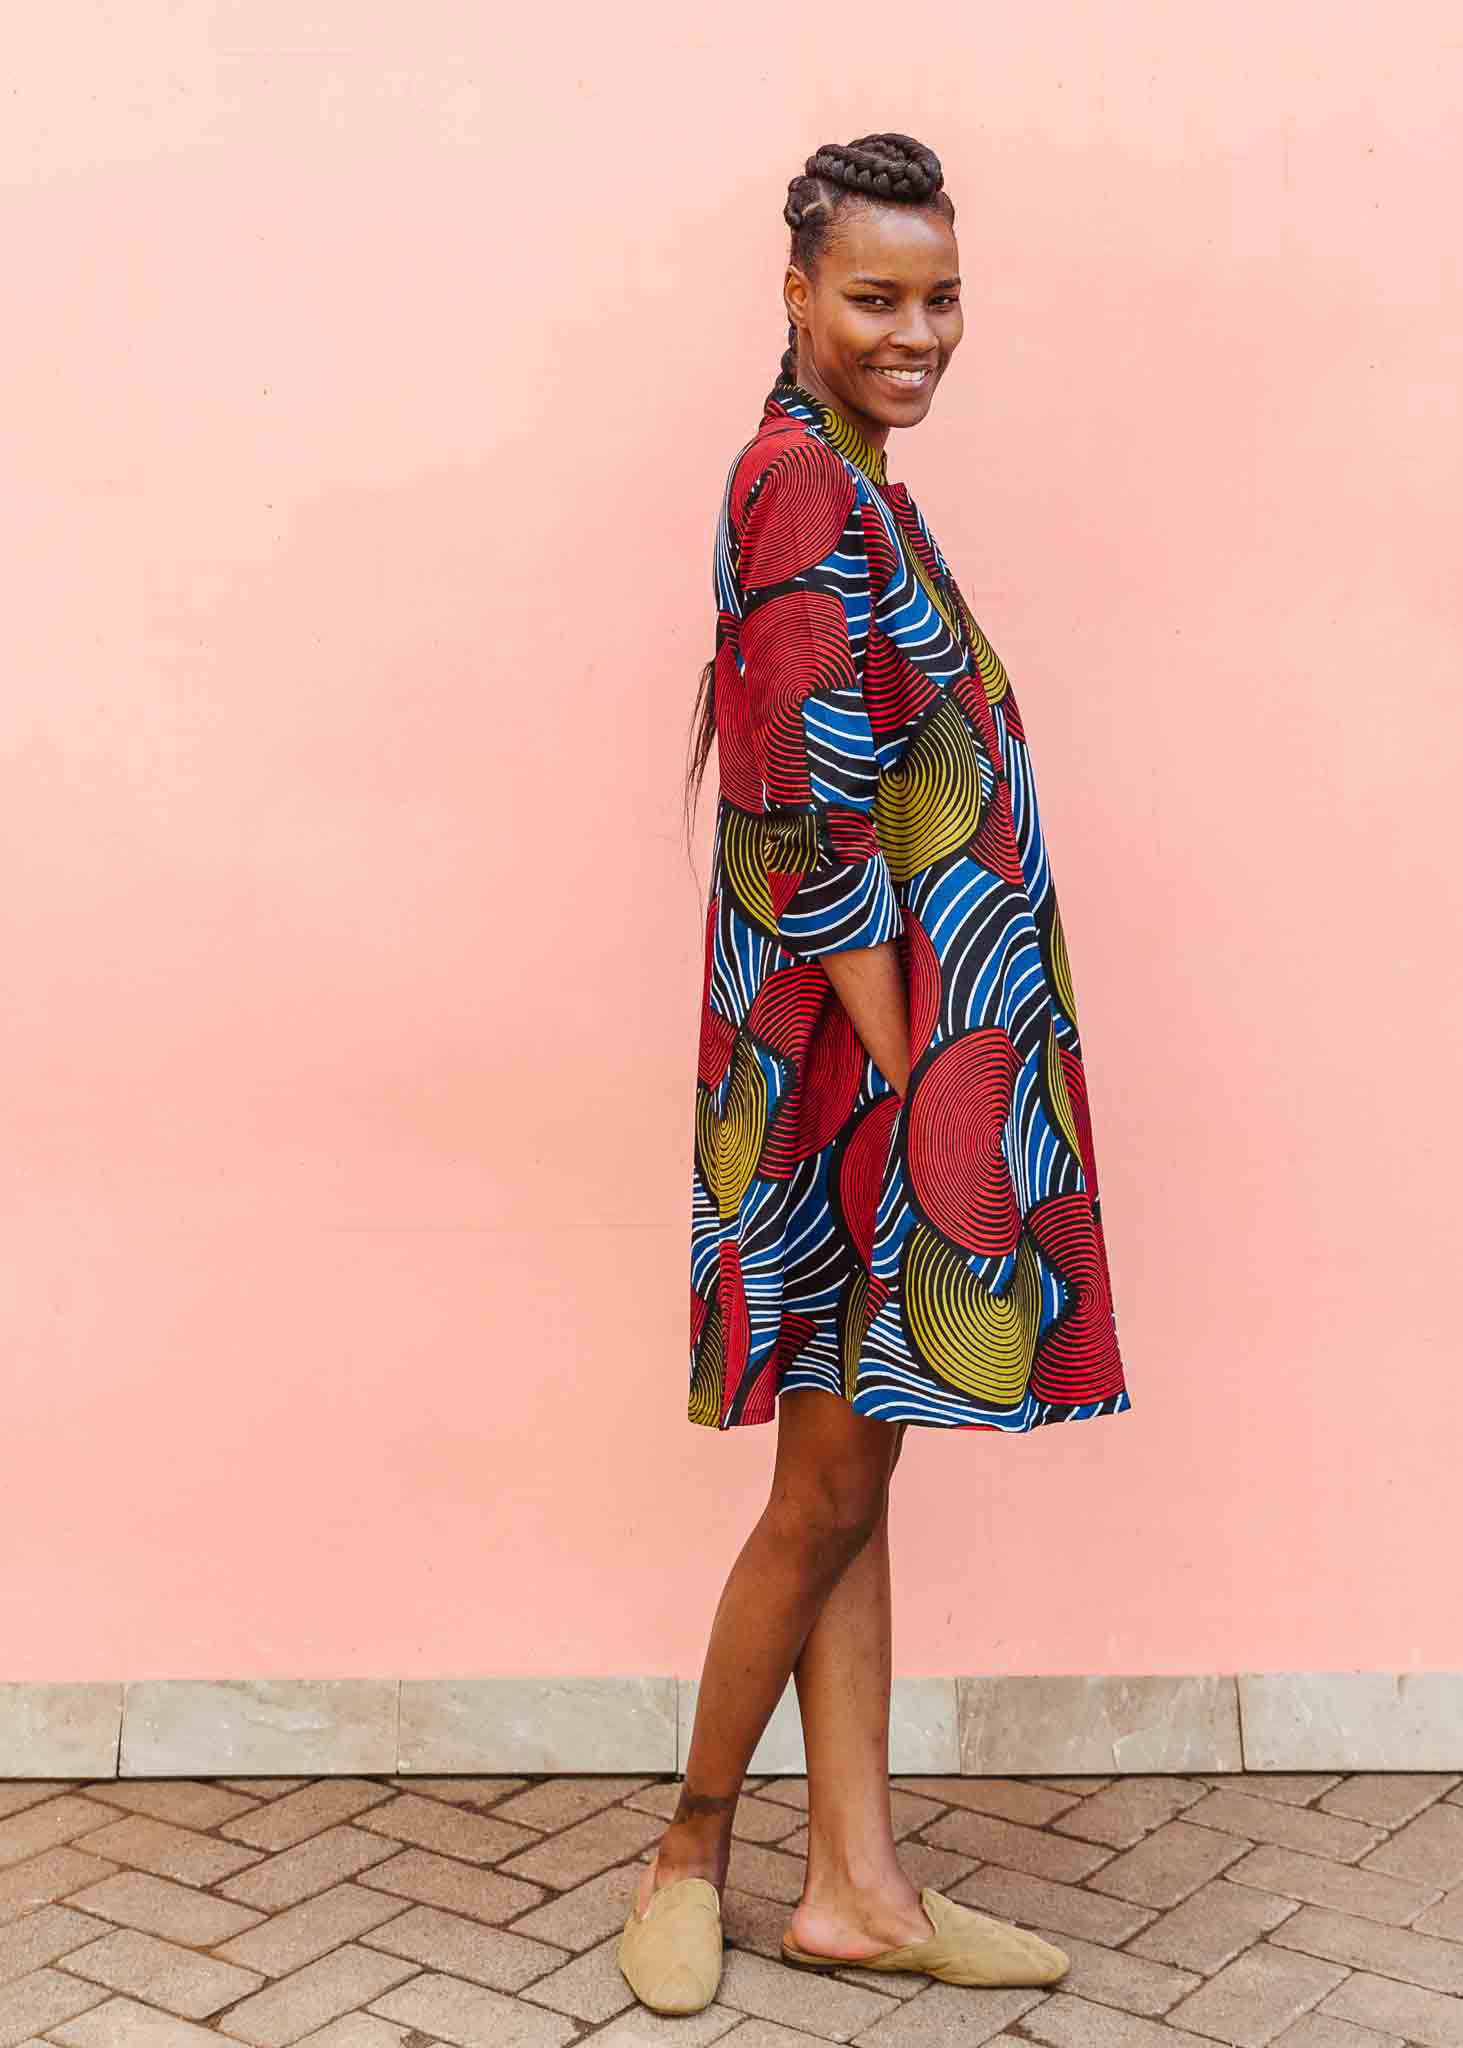 Model wearing circle design dress, featuring primary colors, paired with tan flats.